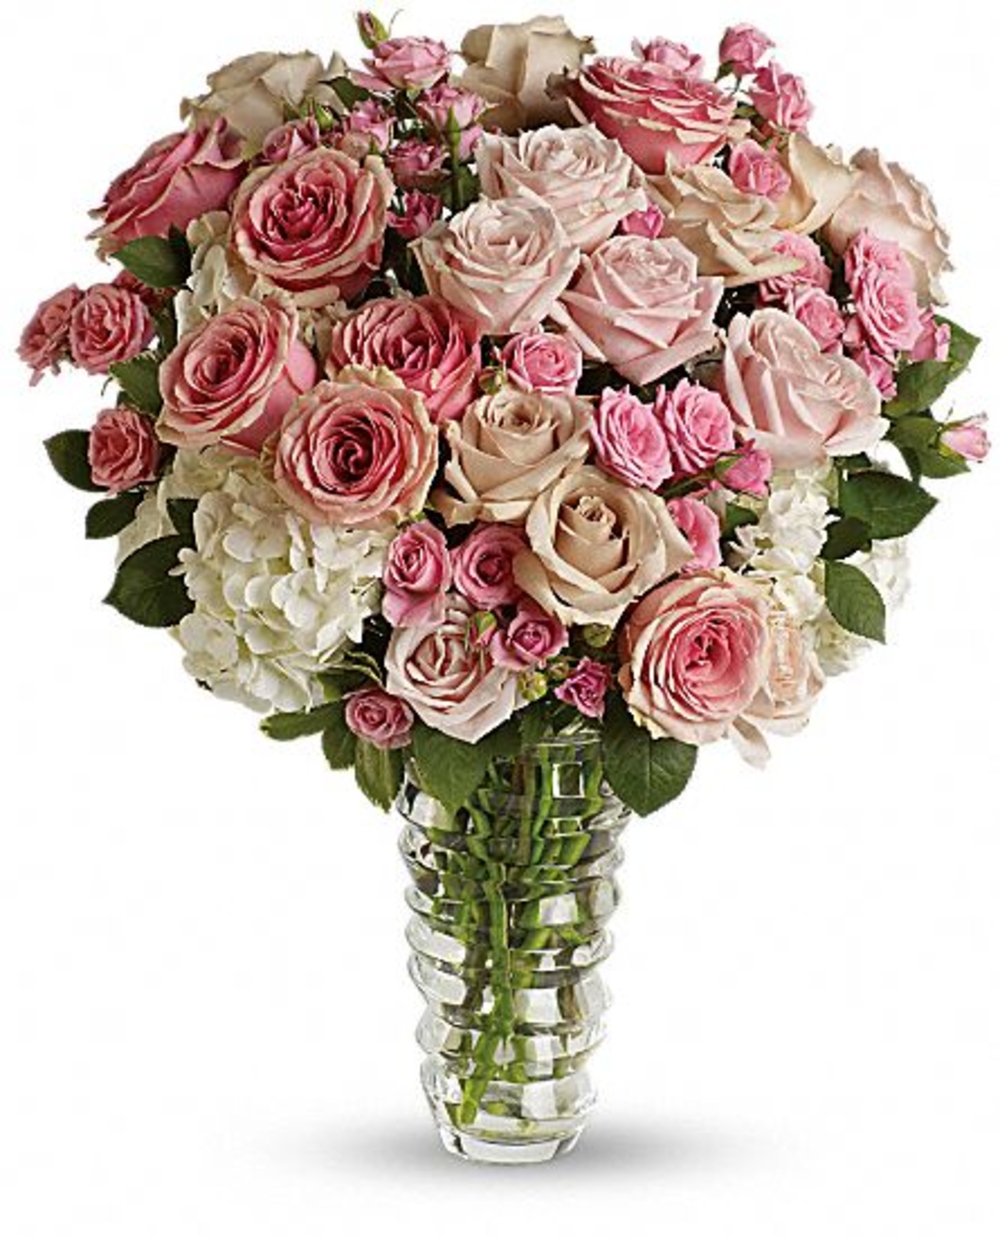 Mixed Roses In A Vase